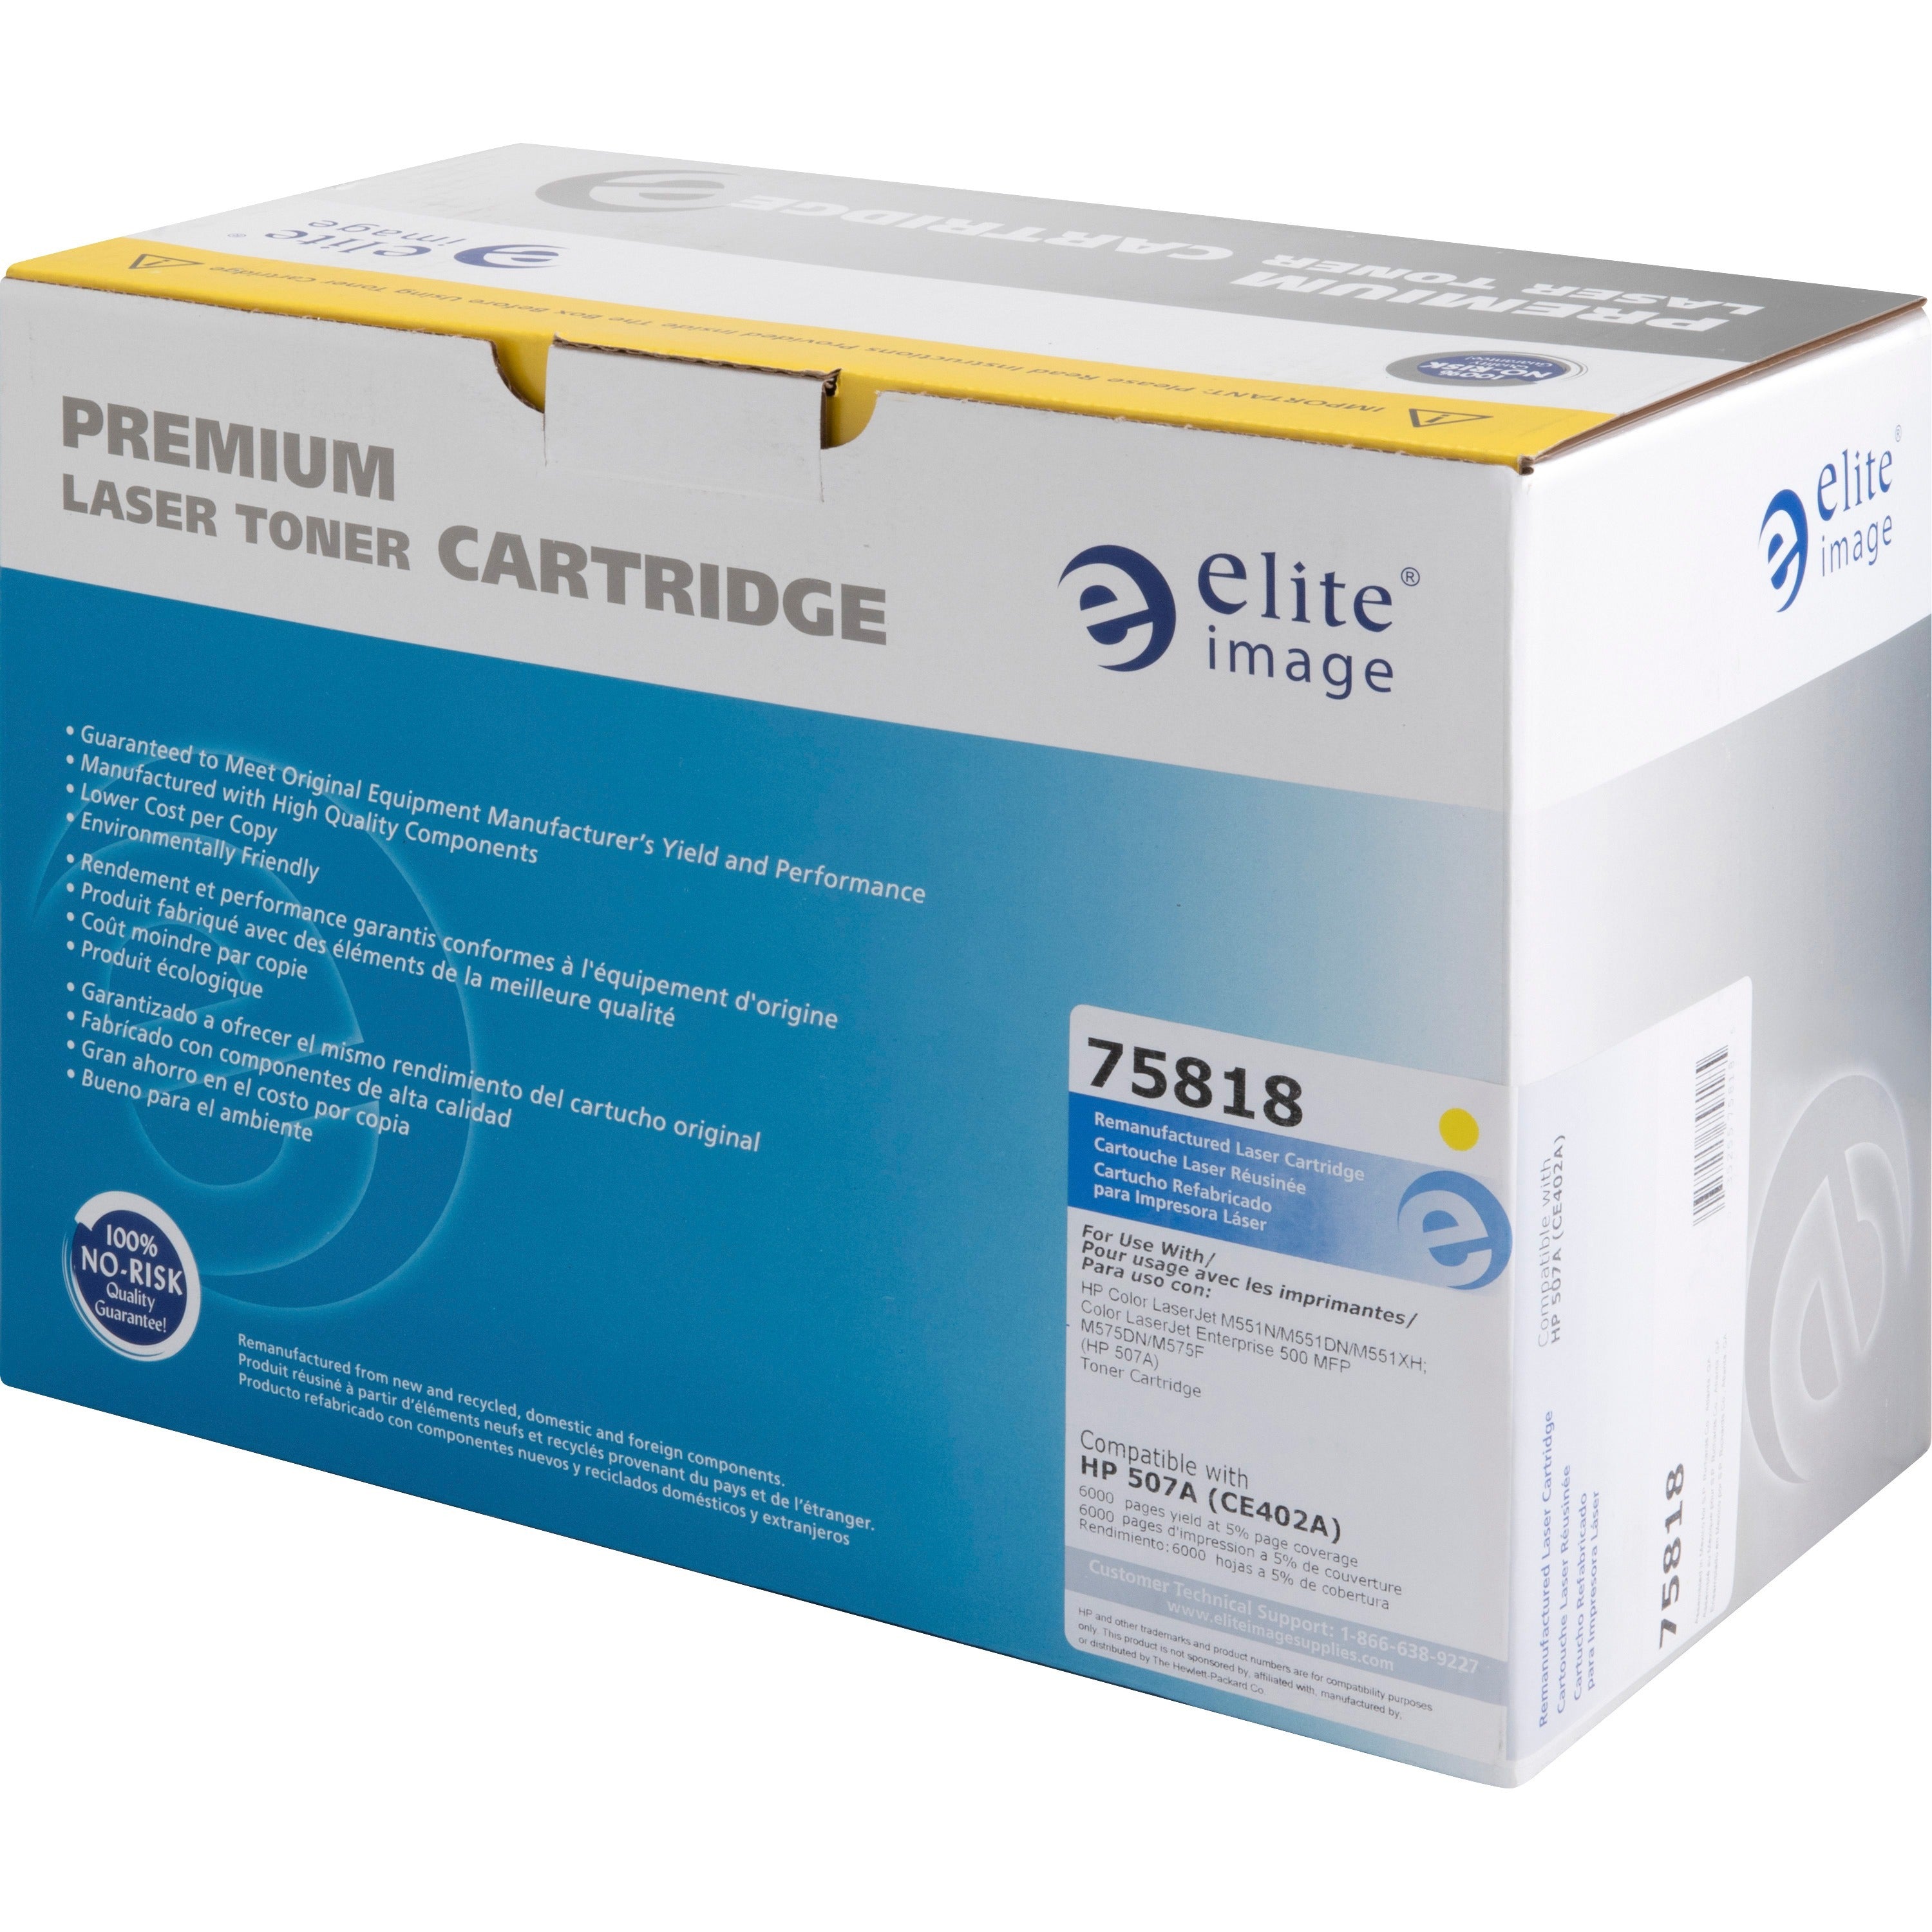 Elite Image Remanufactured Laser Toner Cartridge - Alternative for HP 507A (CE402A) - Yellow - 1 Each - 6000 Pages - 3